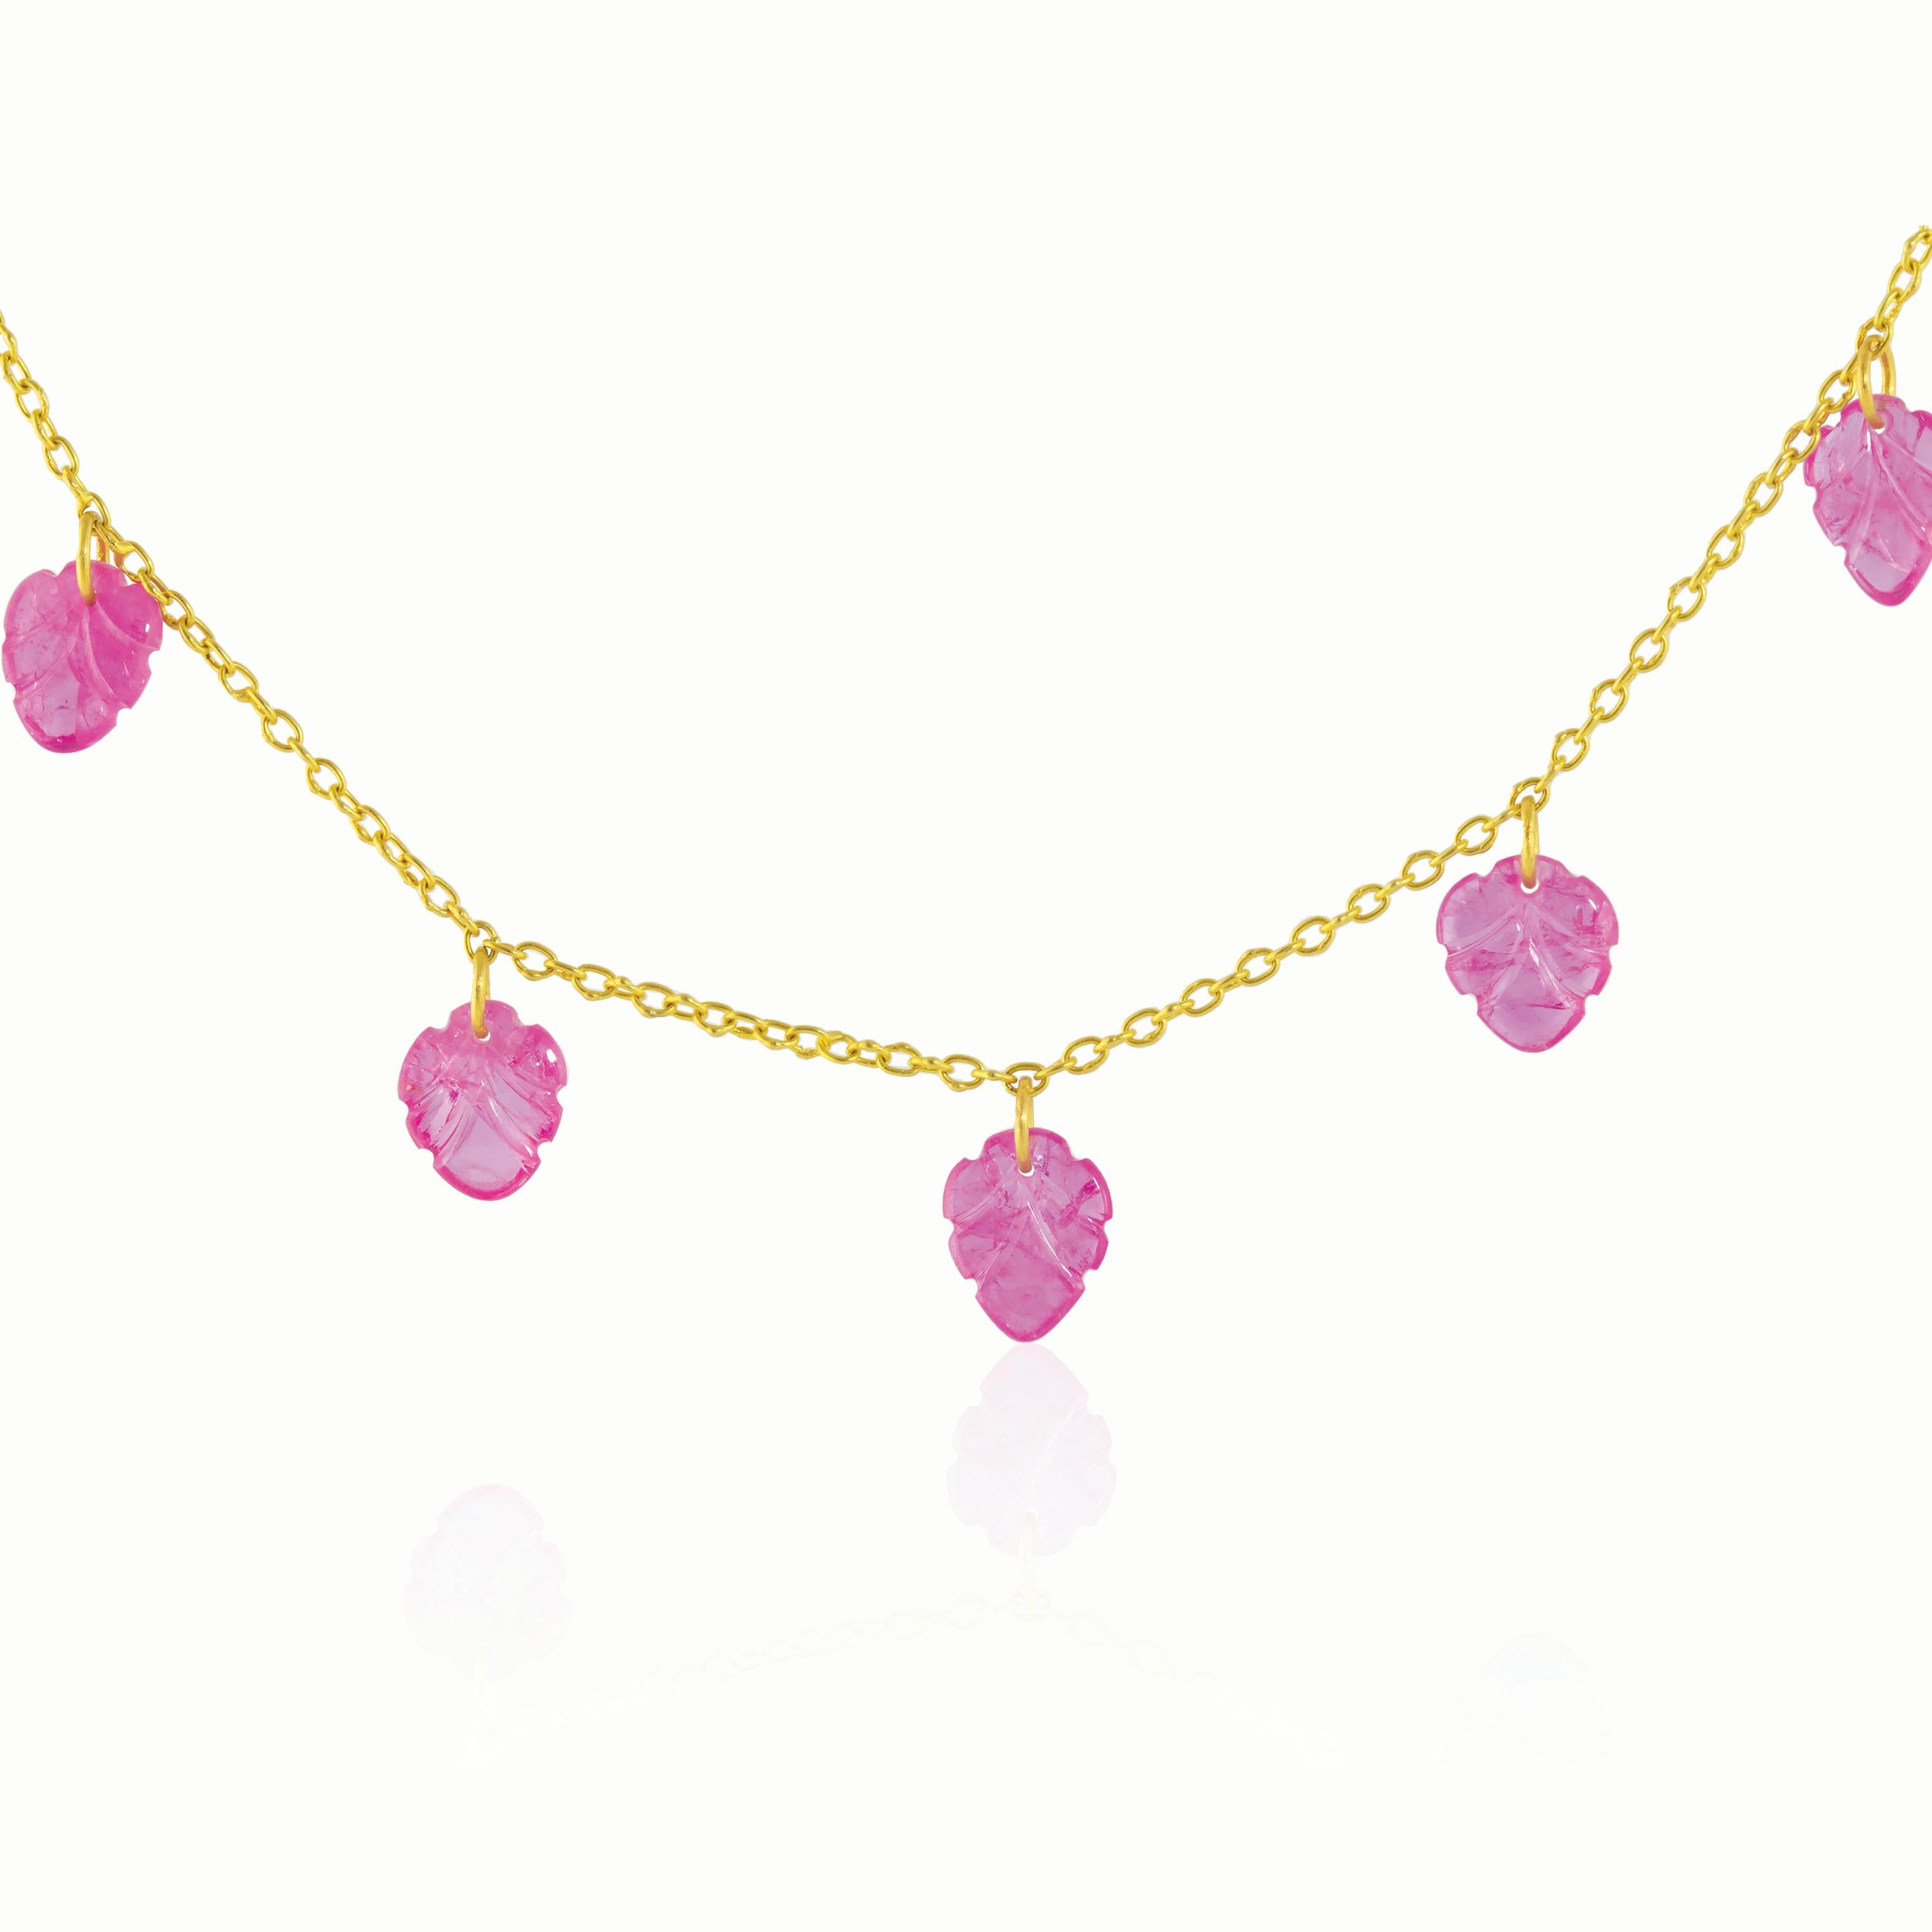 This gorgeous necklace features hand-carved ruby leaves hanging from a 22k gold chain.
Featuring Burmese pink ruby hand-carved leaf drops on a 22k gold chain, this standout necklace will necklace featuring carved ruby leaf drops on a 22k gold